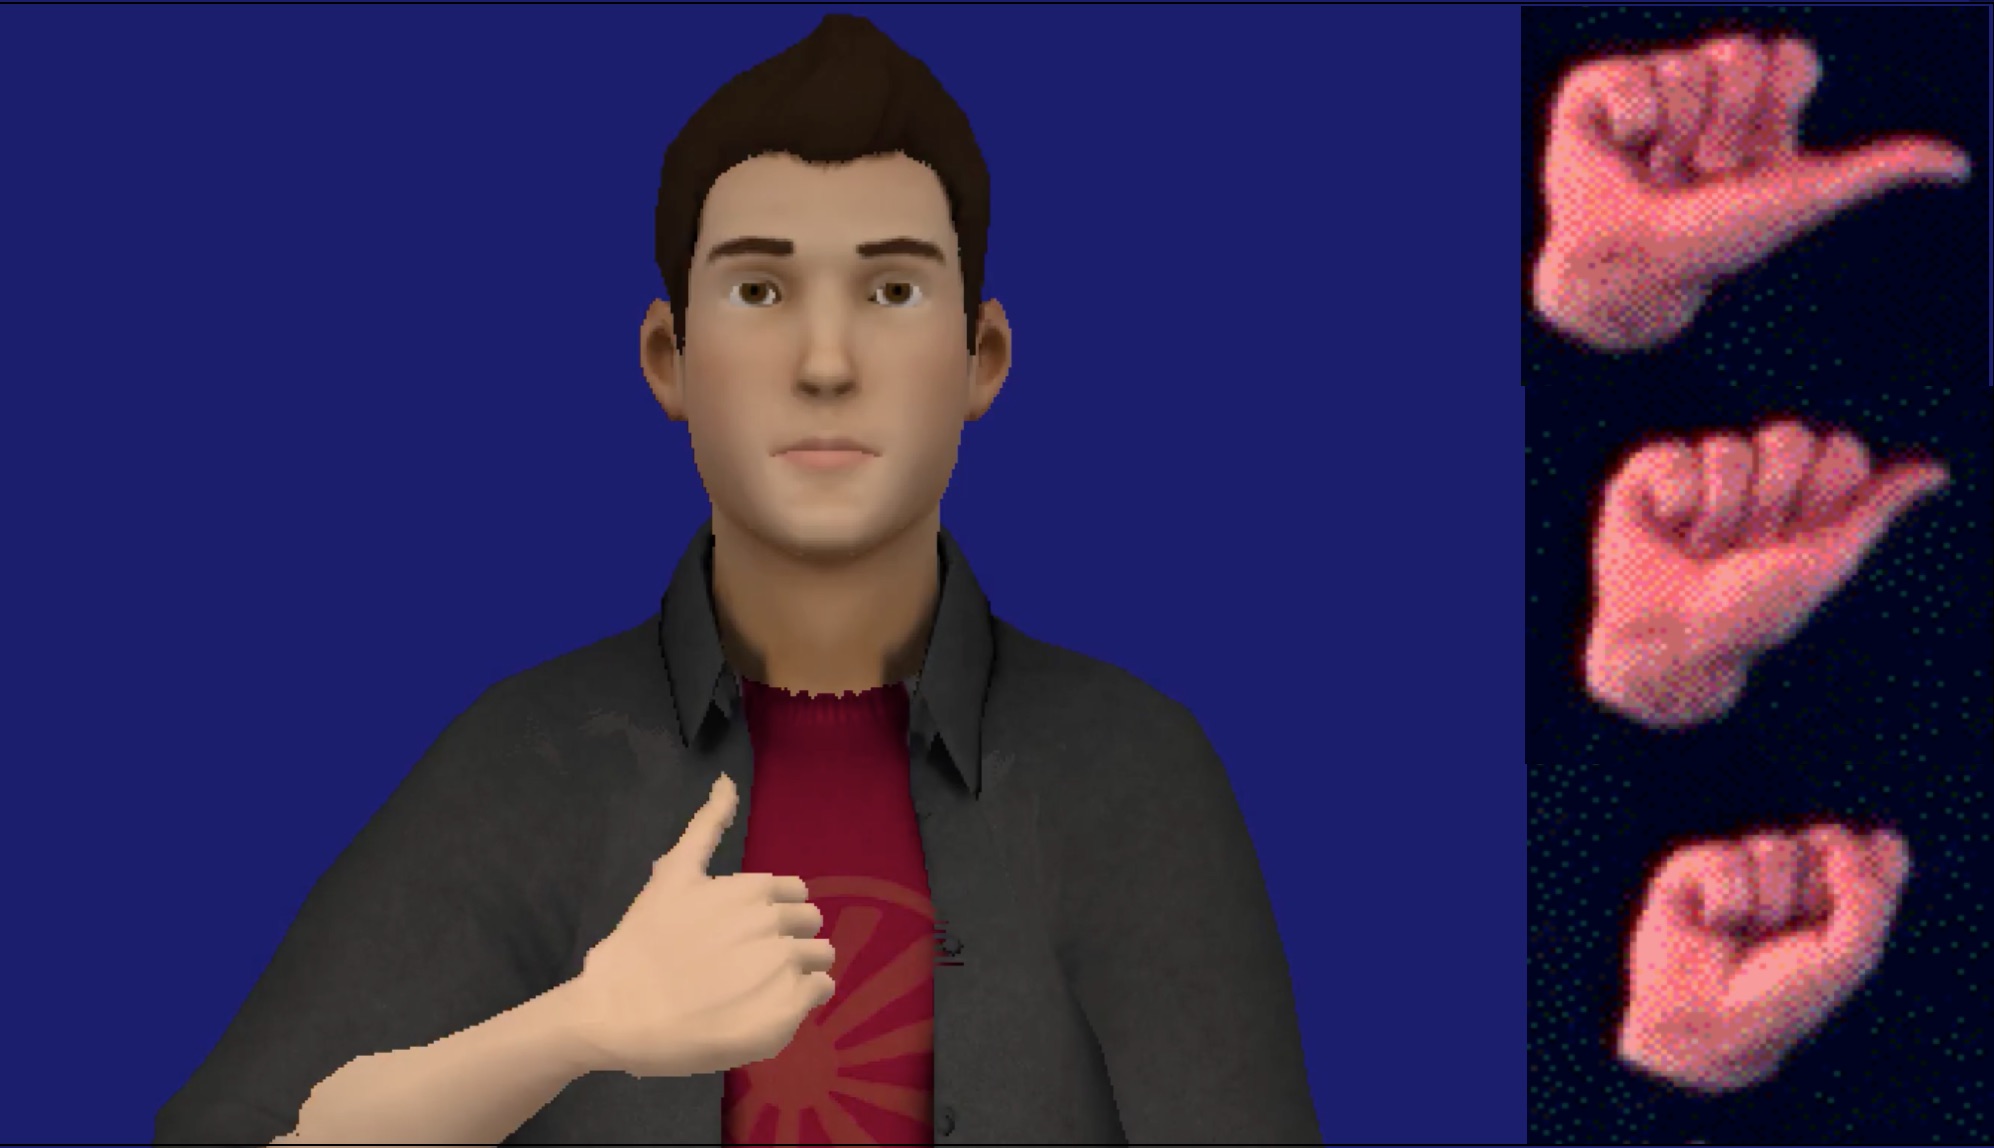 An animation of a virtual human and images of handshapes.